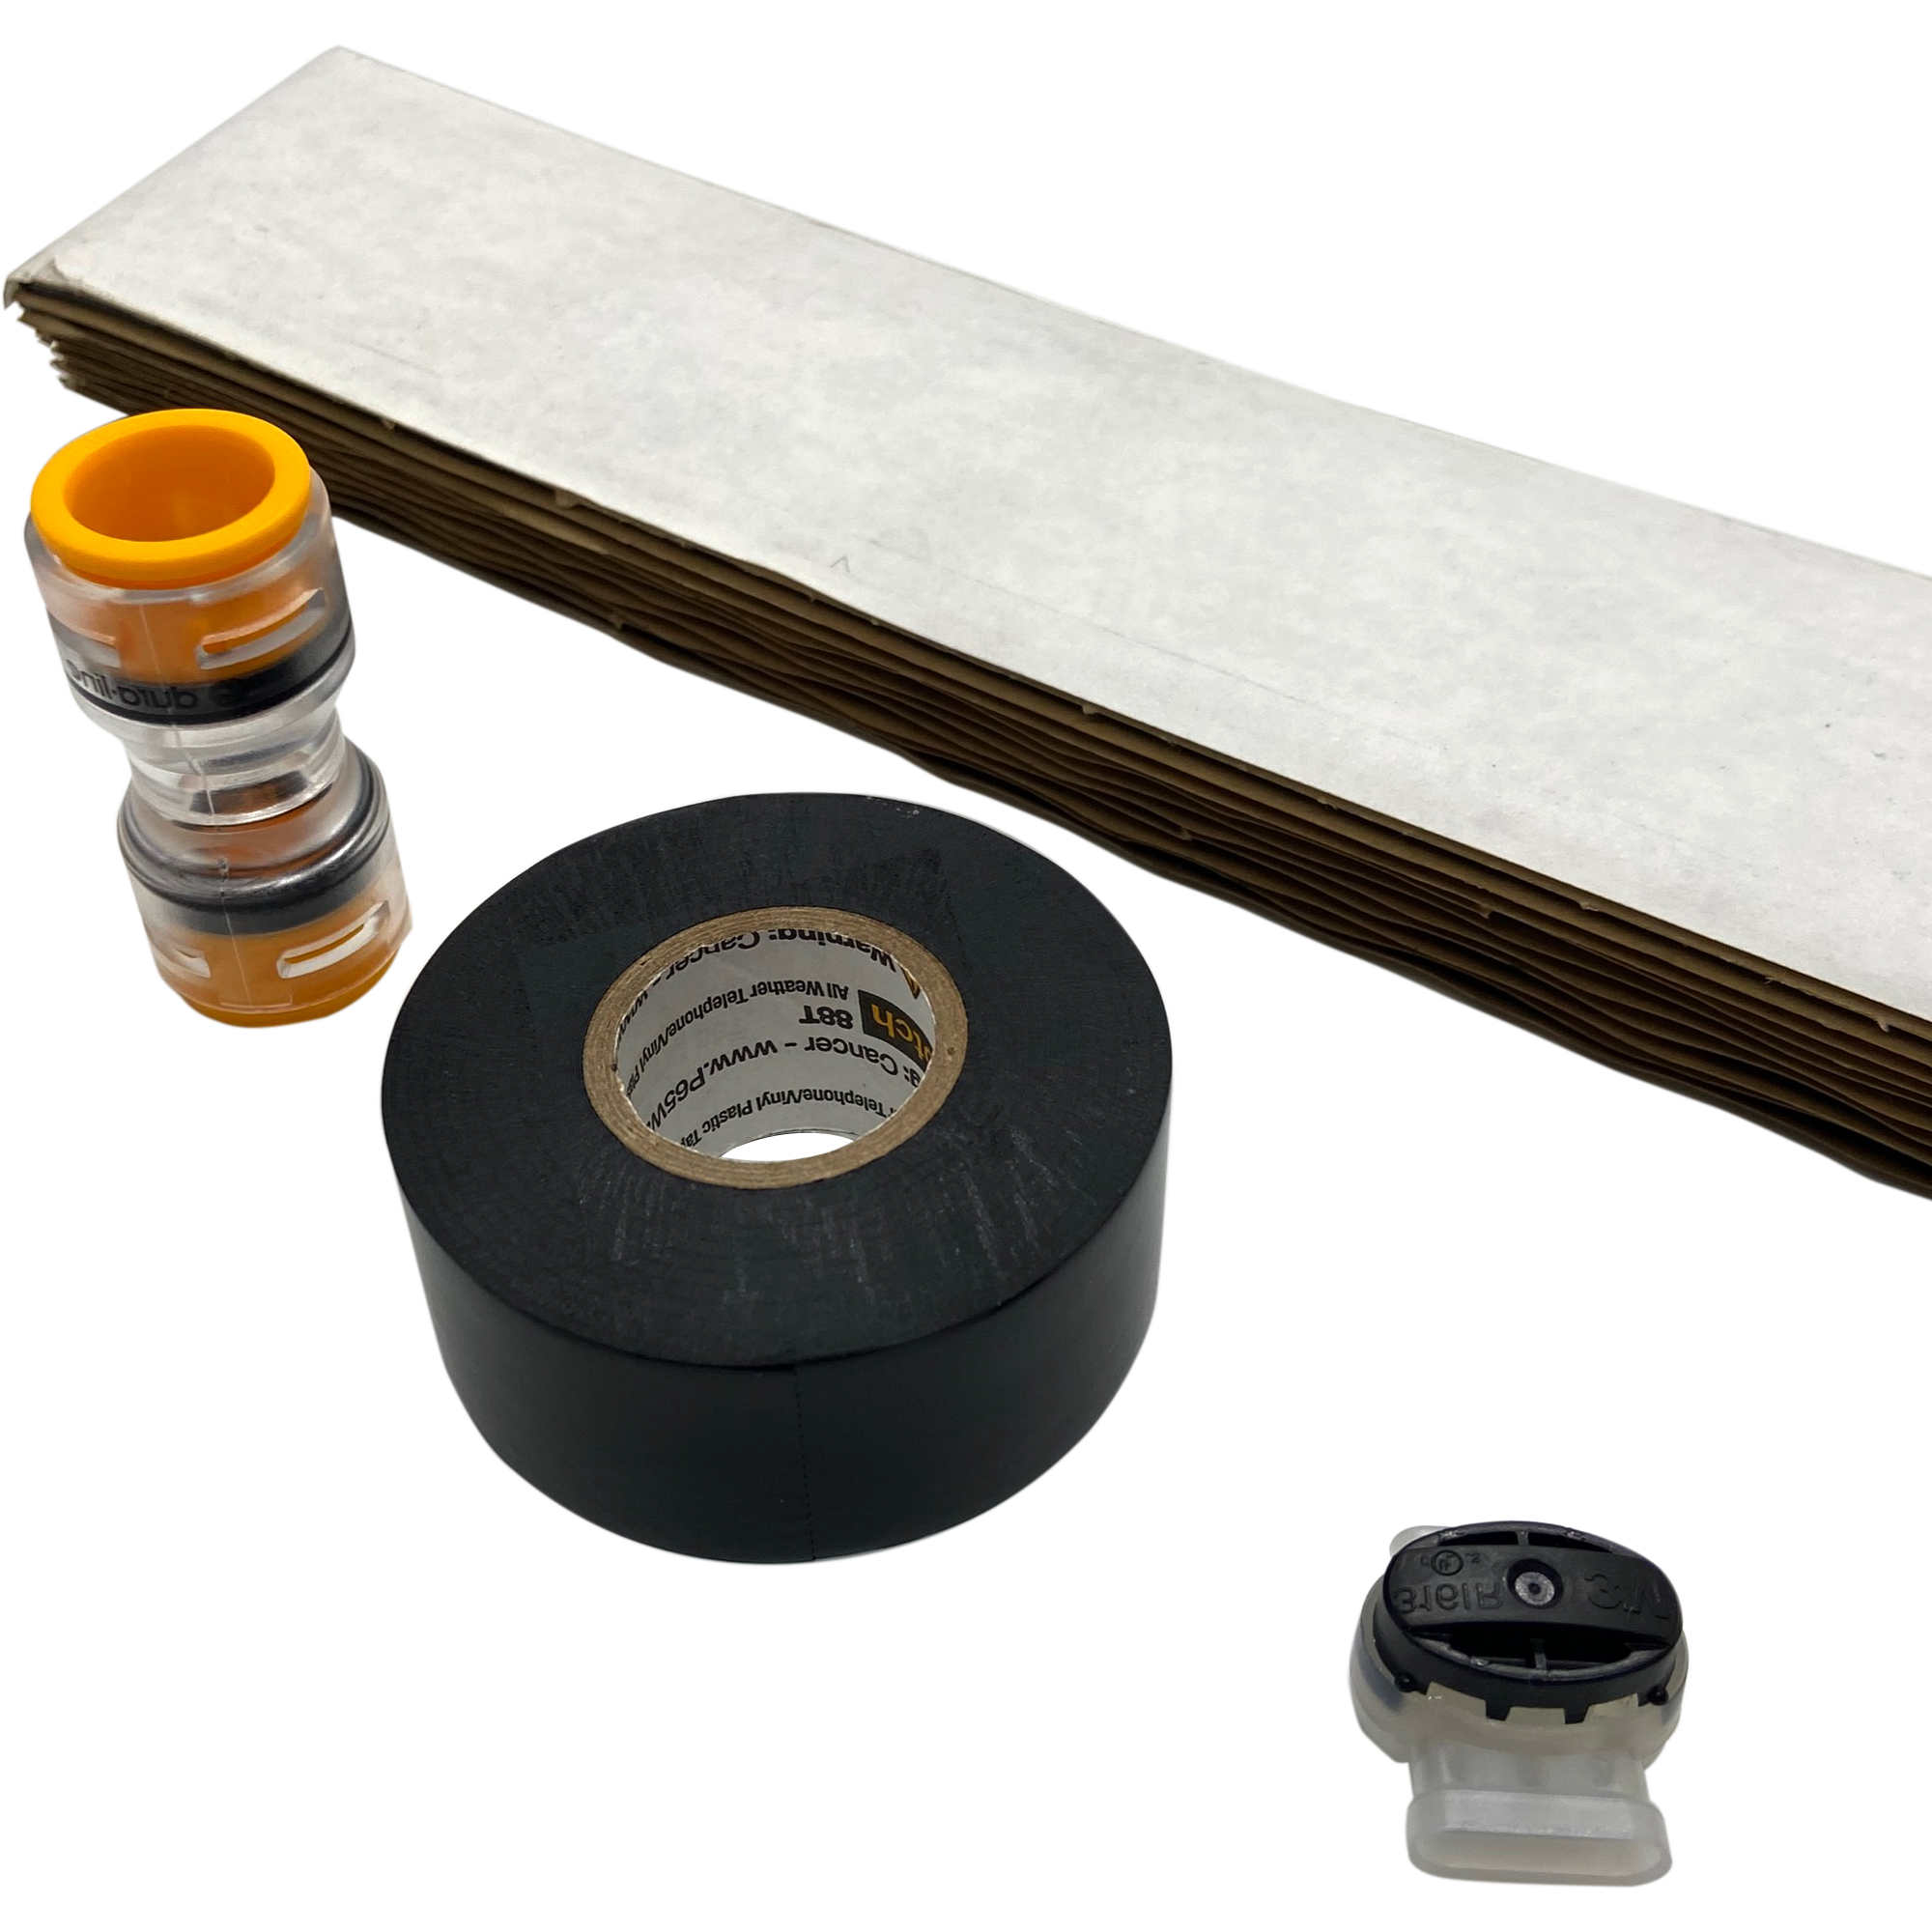 FuturePath Splice Kits provide all the necessary components to join segments of FuturePath.  Kits include correct size of sleeve, couplers, sealant strips, vinyl tape and locate wire connector. 